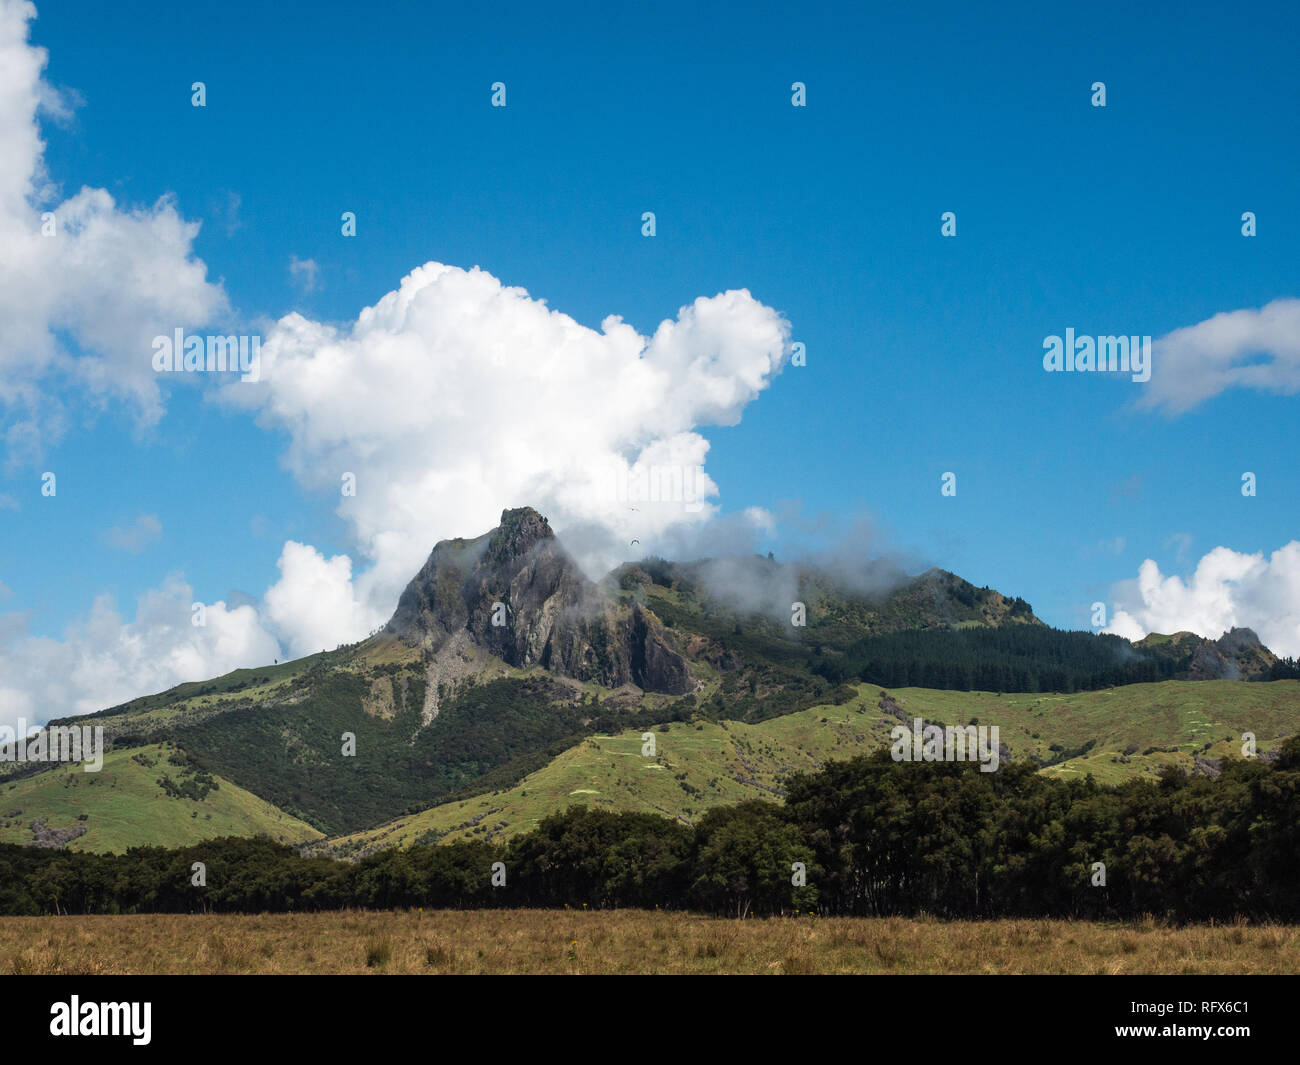 Rocky hill, back country landscape with clouds, Tapuaeroa Valley, East Cape, North Island, New Zealand Stock Photo